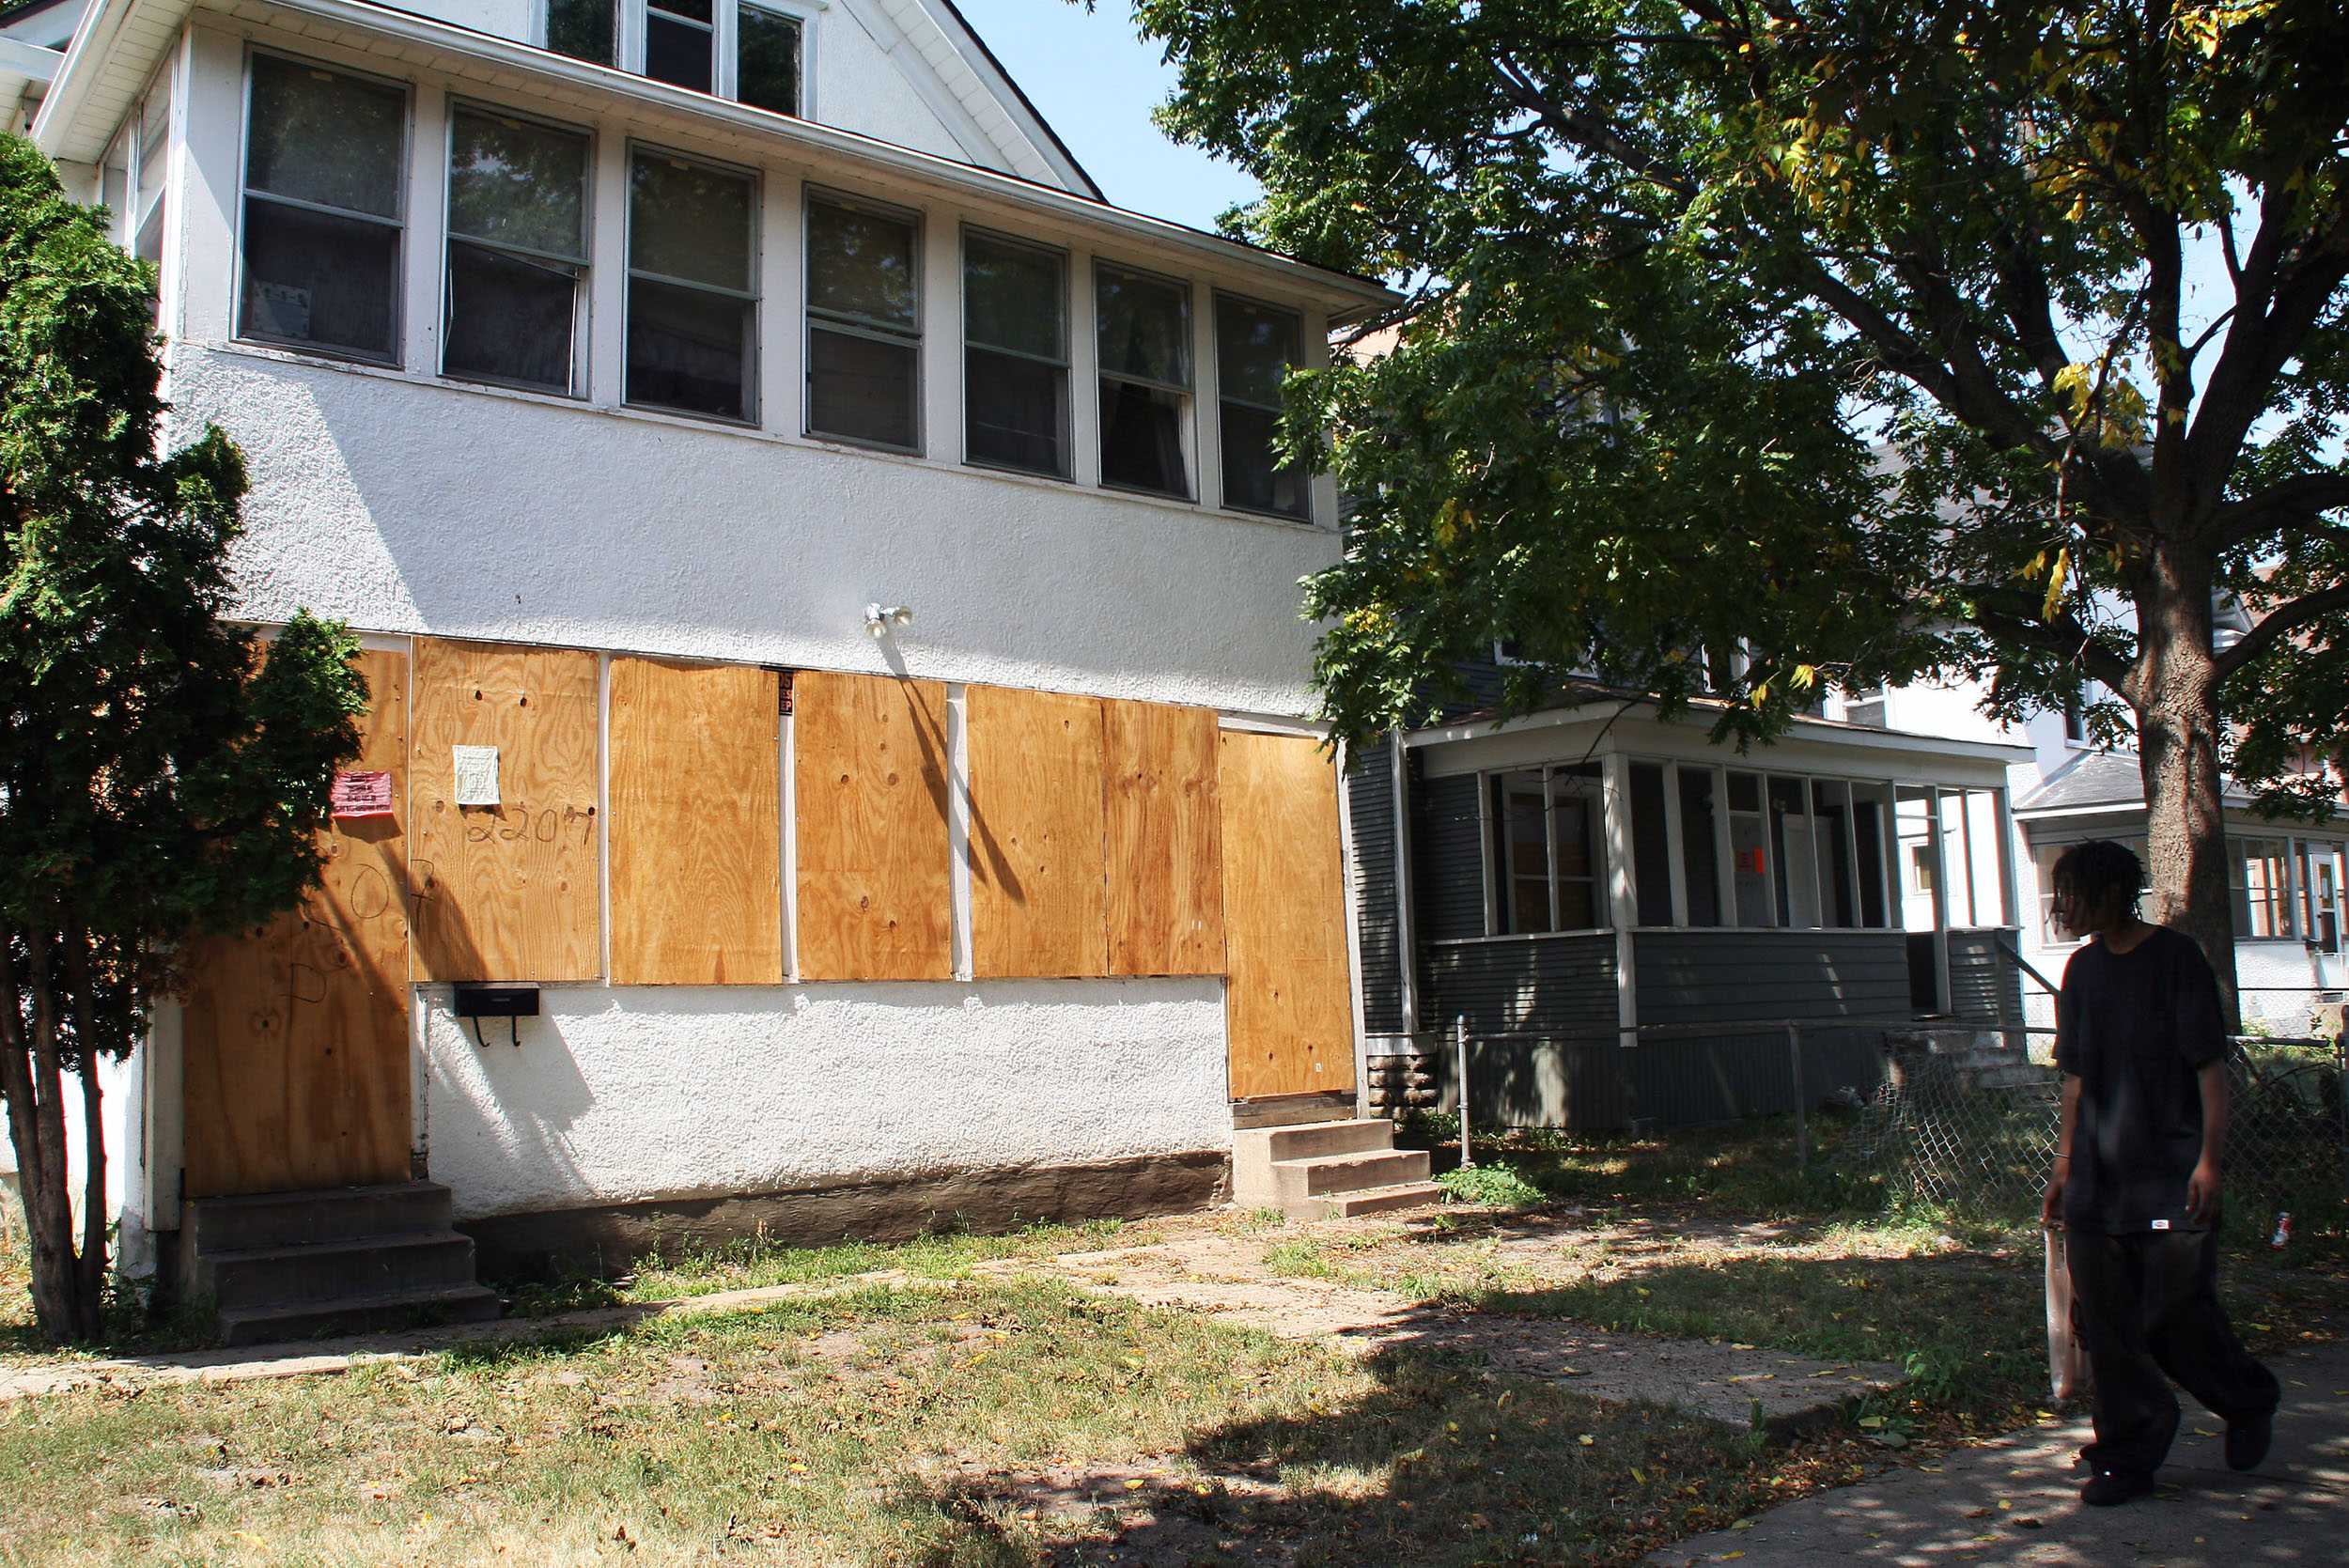 A home is boarded up Aug 10, 2007, in the North Minneapolis, Minnesota, neighborhood, which saw some of the nation's highest foreclosure rates from 2004-2008. (Kari Goodnough—Bloomberg/Getty Images)